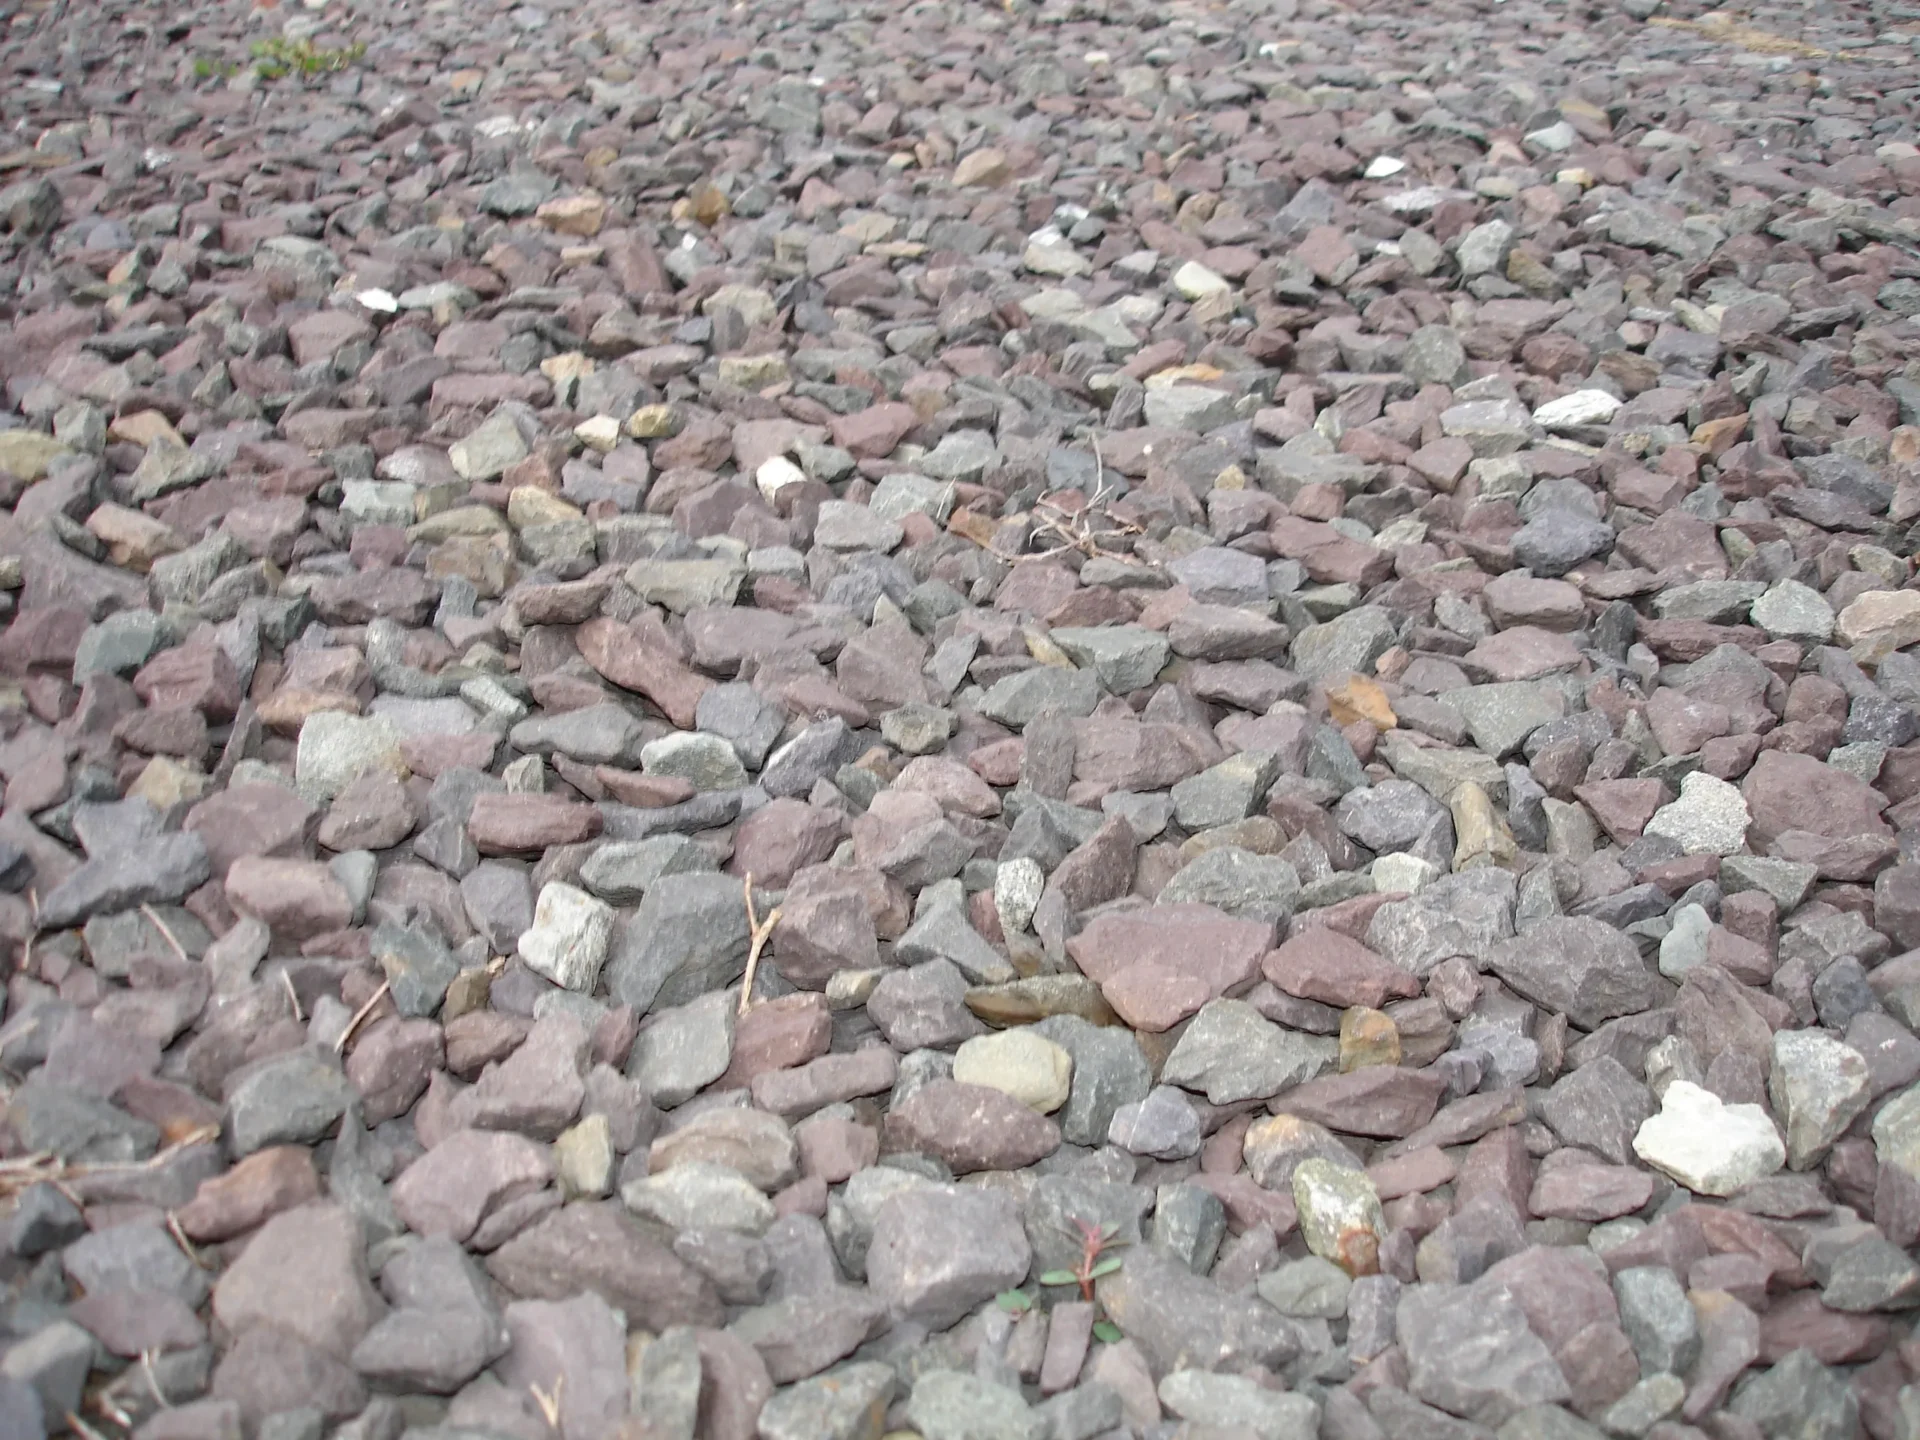 A close up of some rocks on the ground